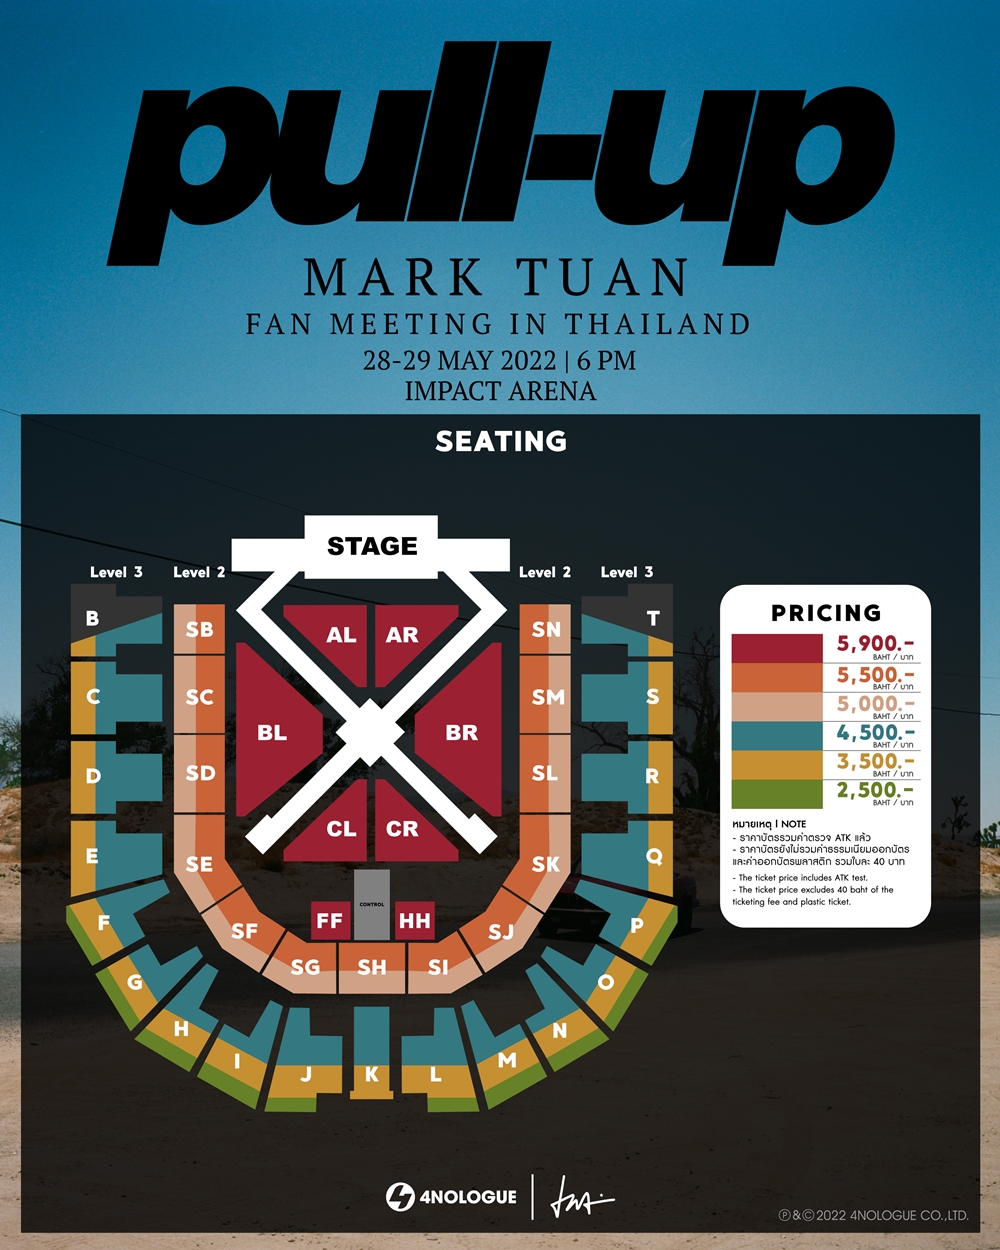 “PULL-UP” MARK TUAN FAN MEETING IN THAILAND